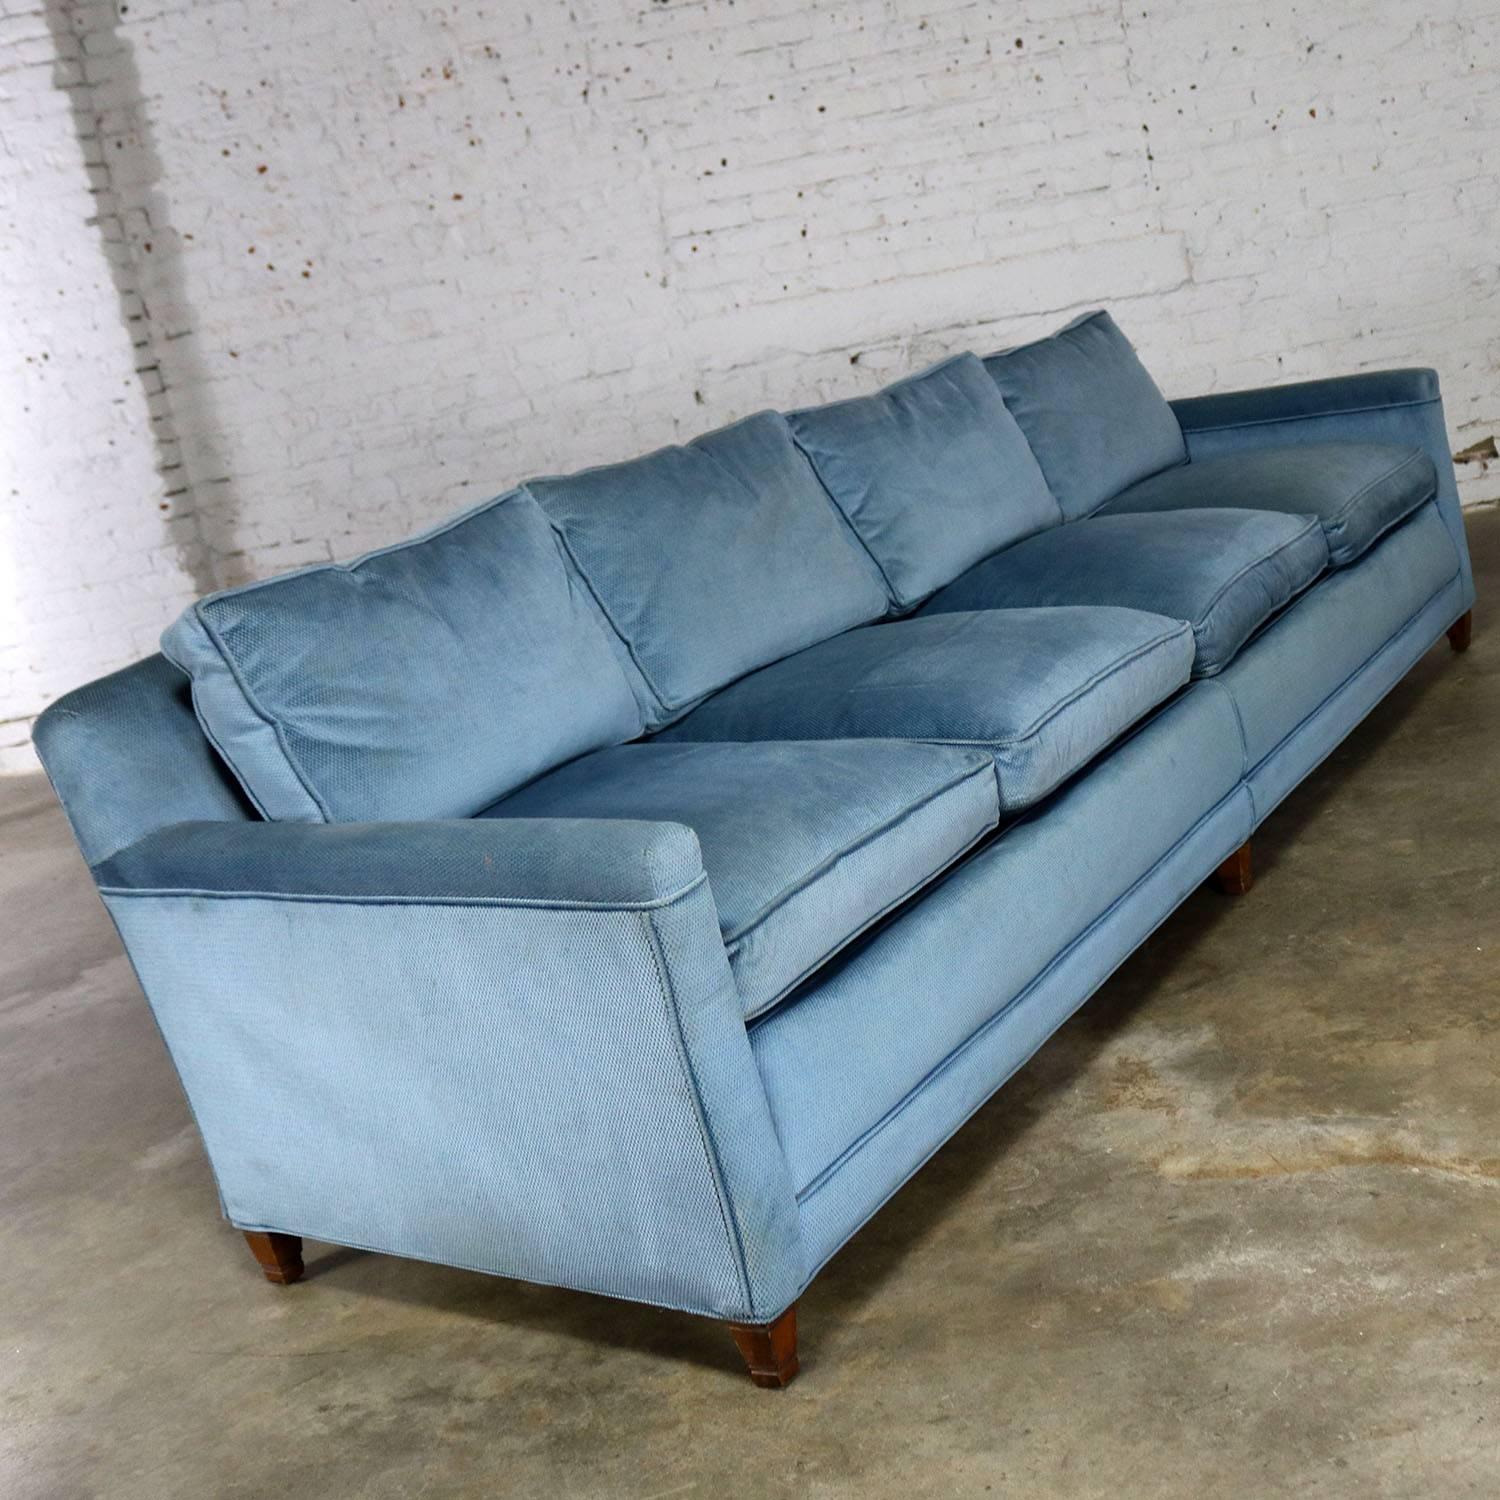 Slender and simple Lawson style four cushion sofa in powder or Wedgwood blue upholstery. This vintage sofa is circa 1960s and in wonderful condition. The seat cushions are foam with feather/down wrap and the back pillows are all feather or down. The